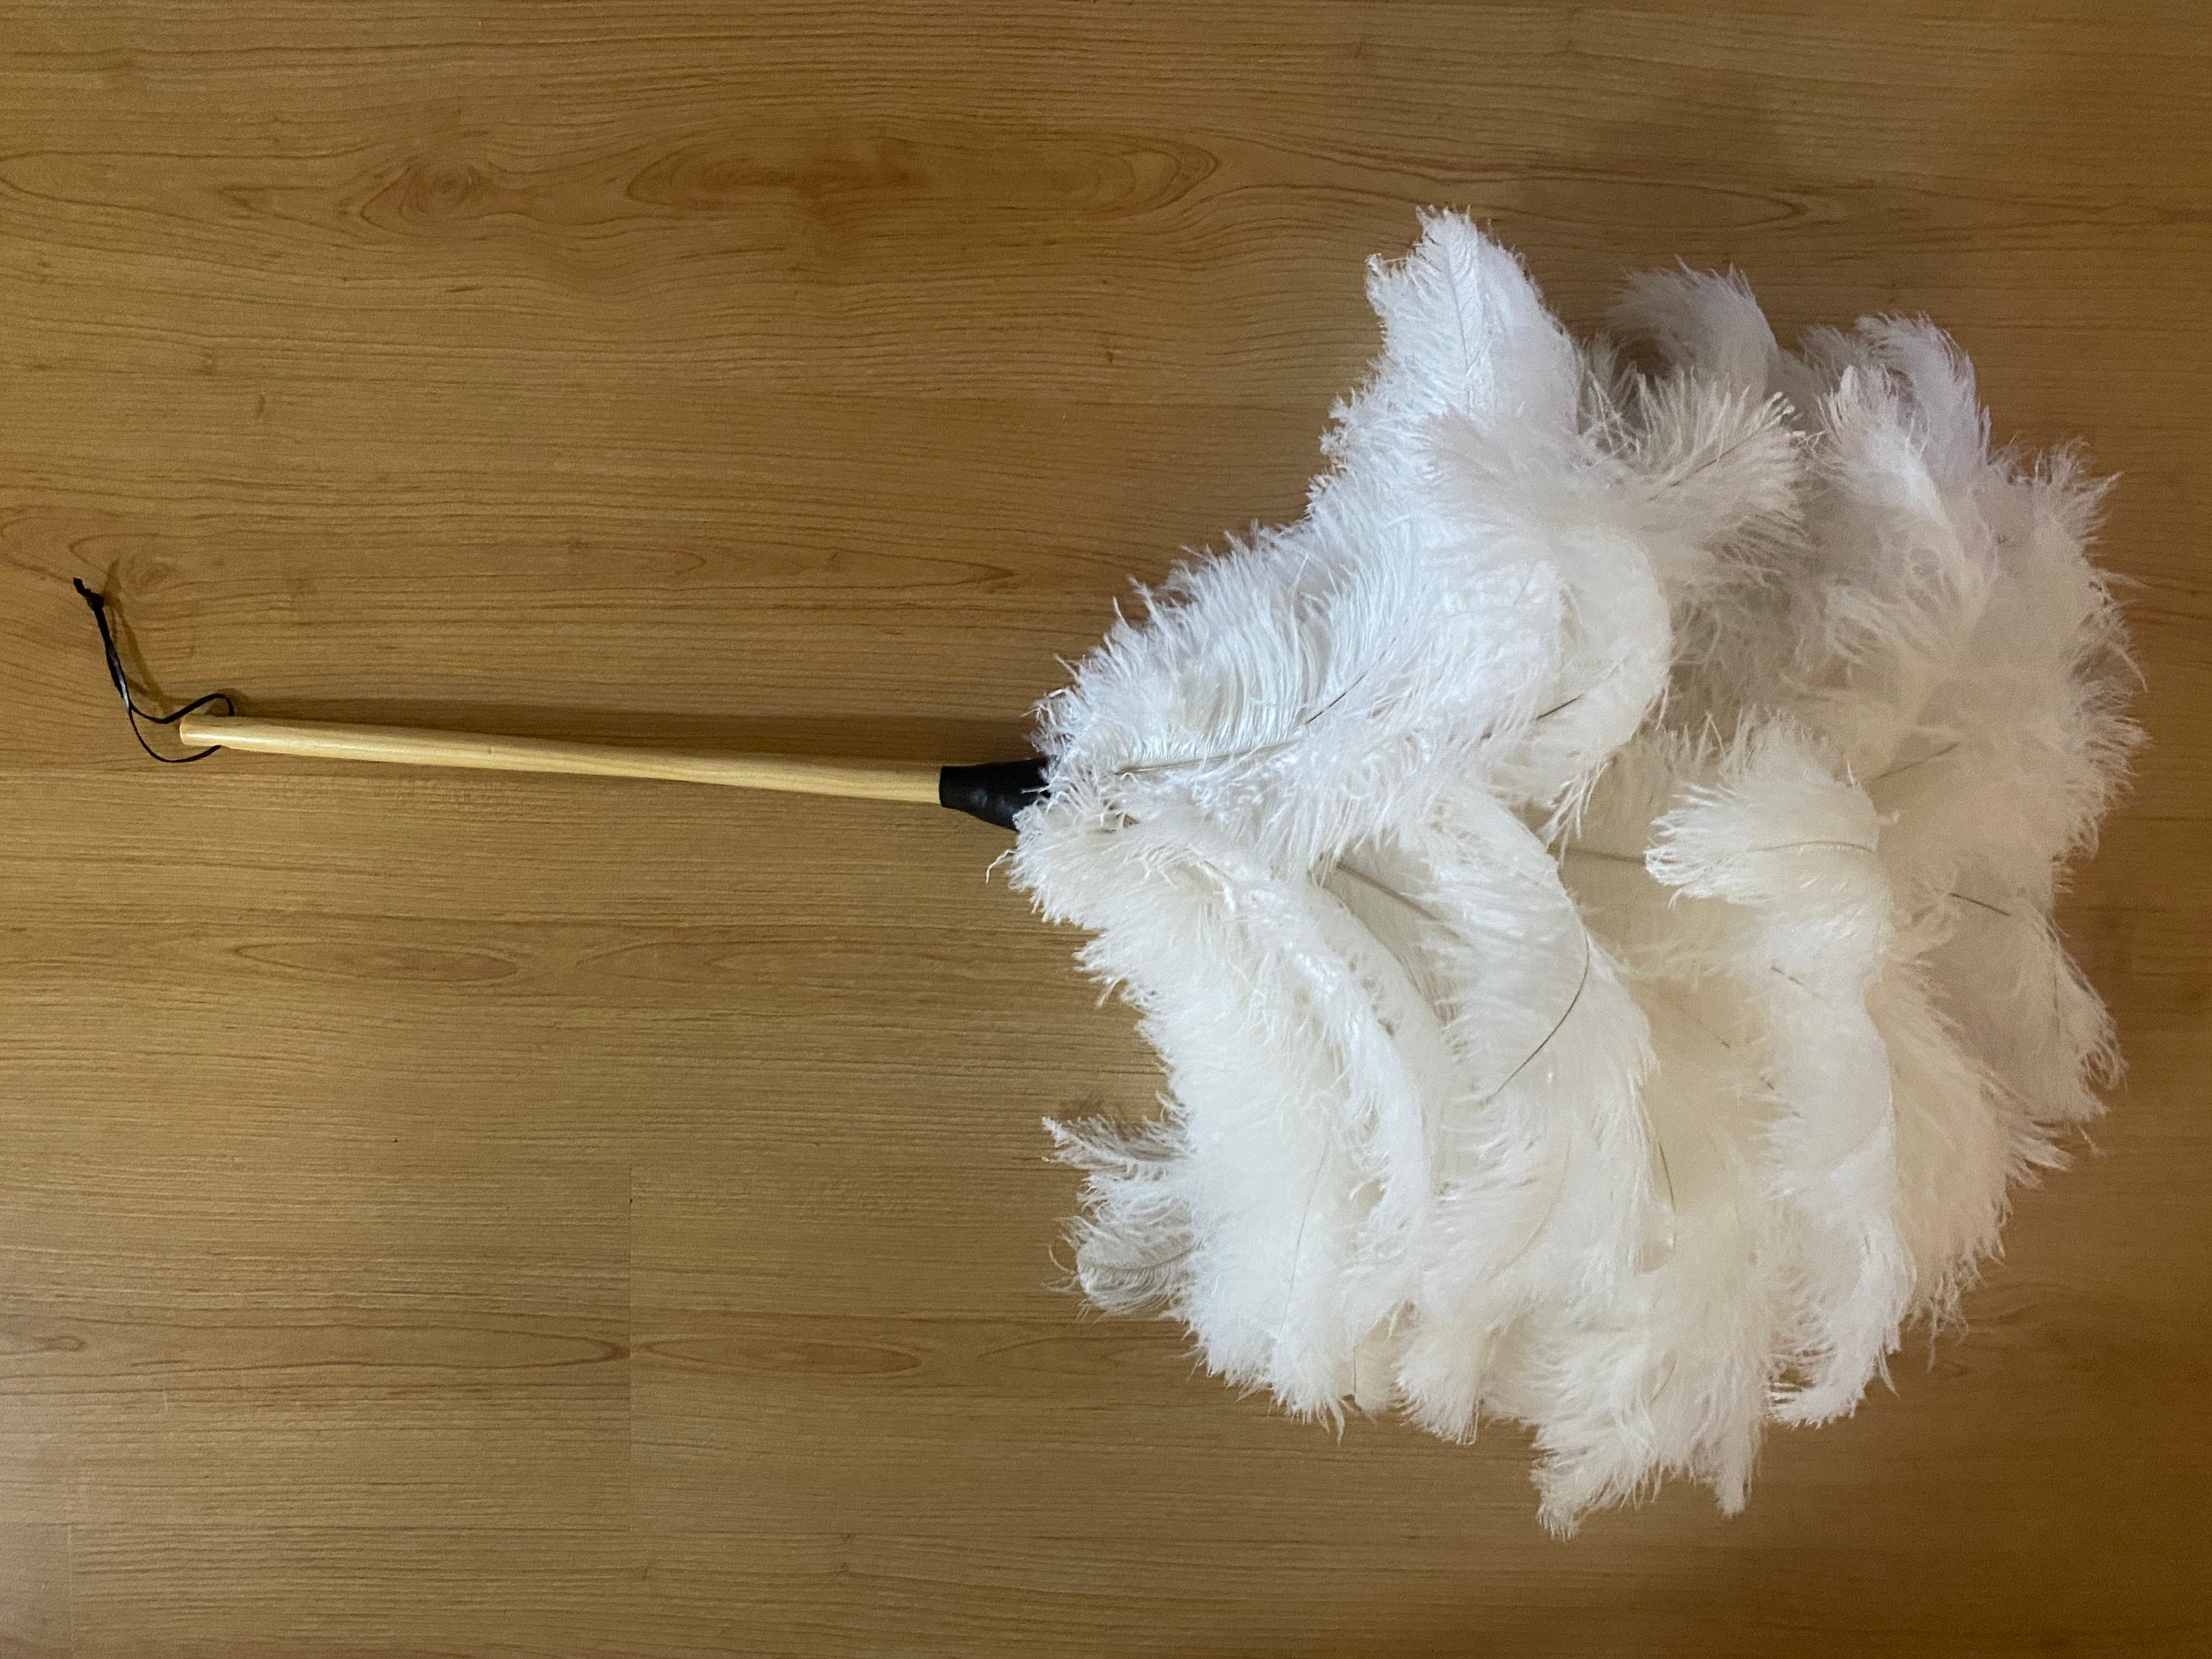 Ostrich Feather Fringe for Sale Online